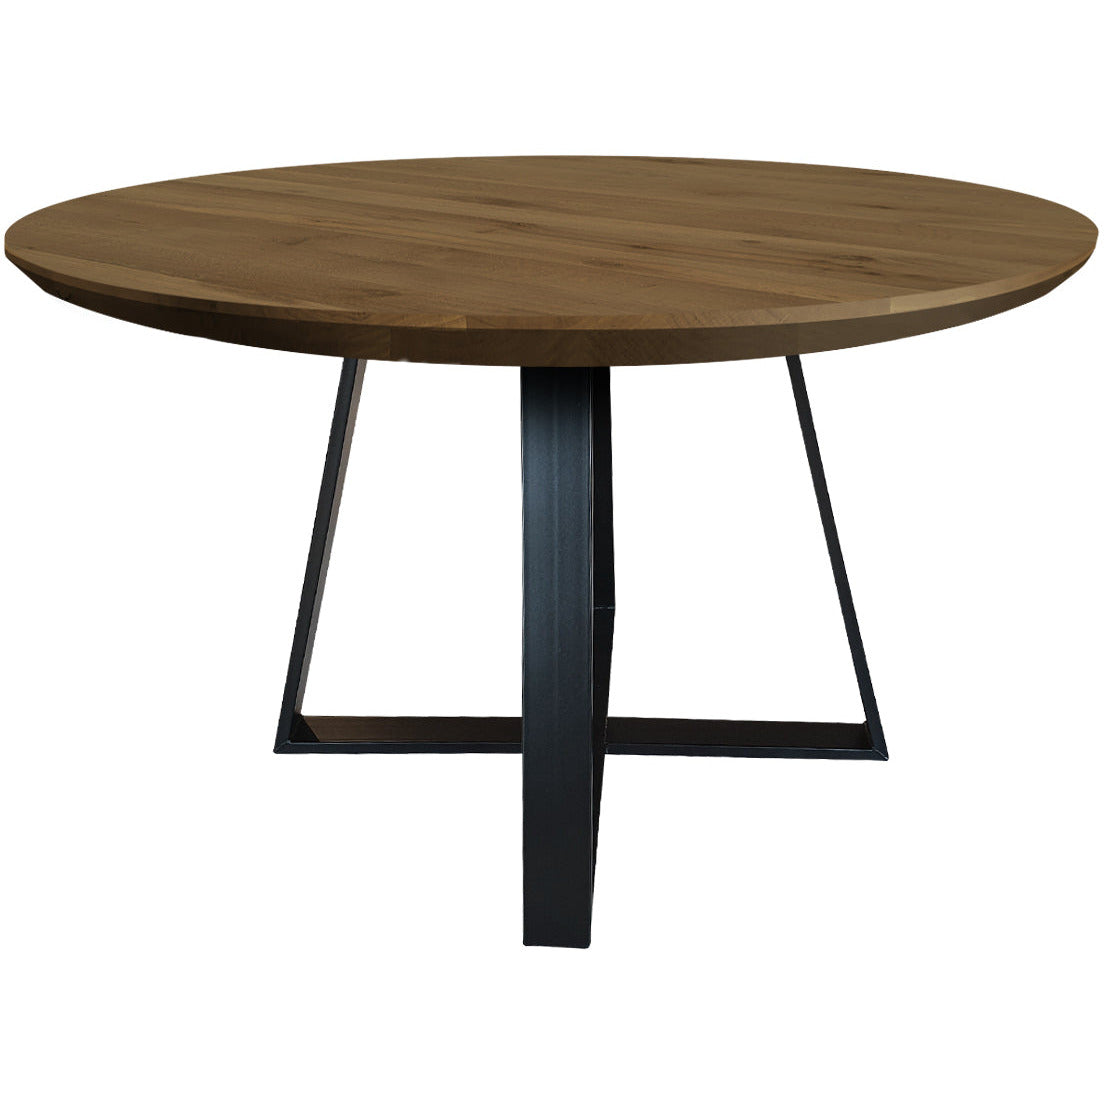 Dining table | Round | Warm brown | Oak wood | Lacquered Cross Leg |